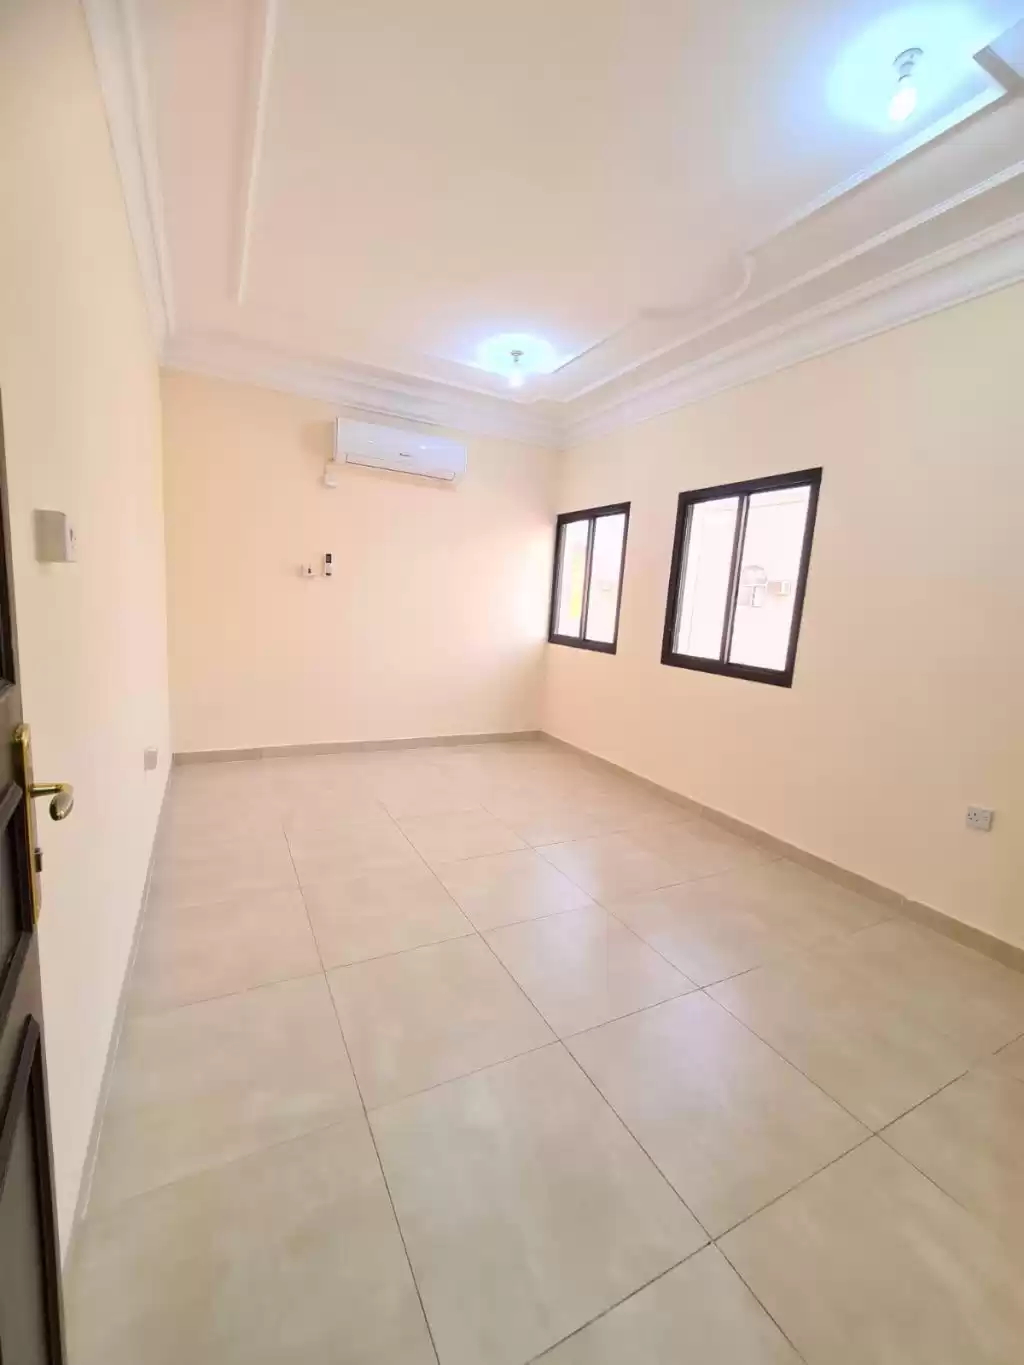 Residential Ready Property 1 Bedroom U/F Apartment  for rent in Al Sadd , Doha #11209 - 1  image 